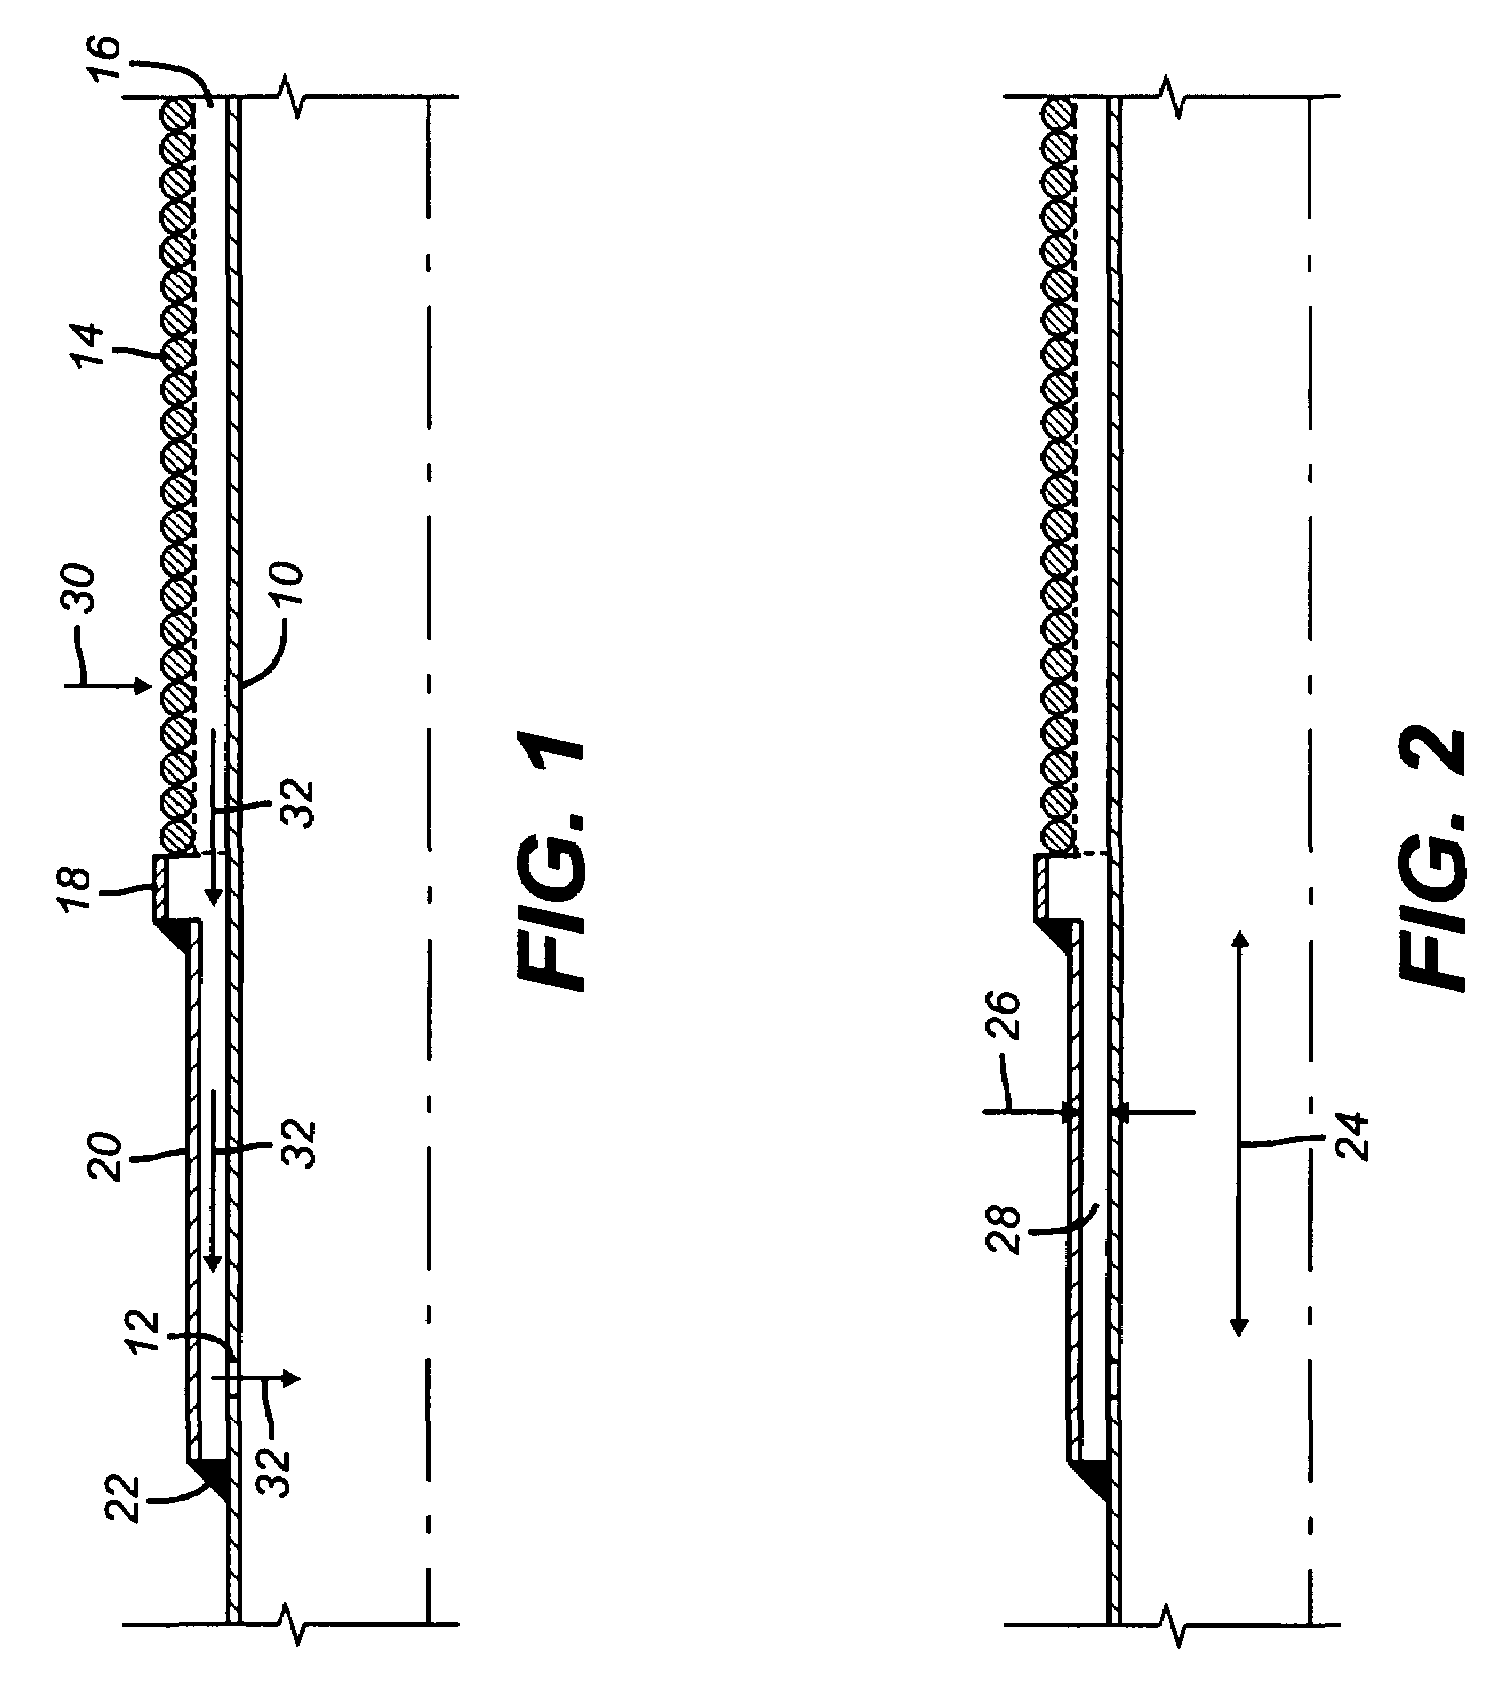 Viscous oil inflow control device for equalizing screen flow